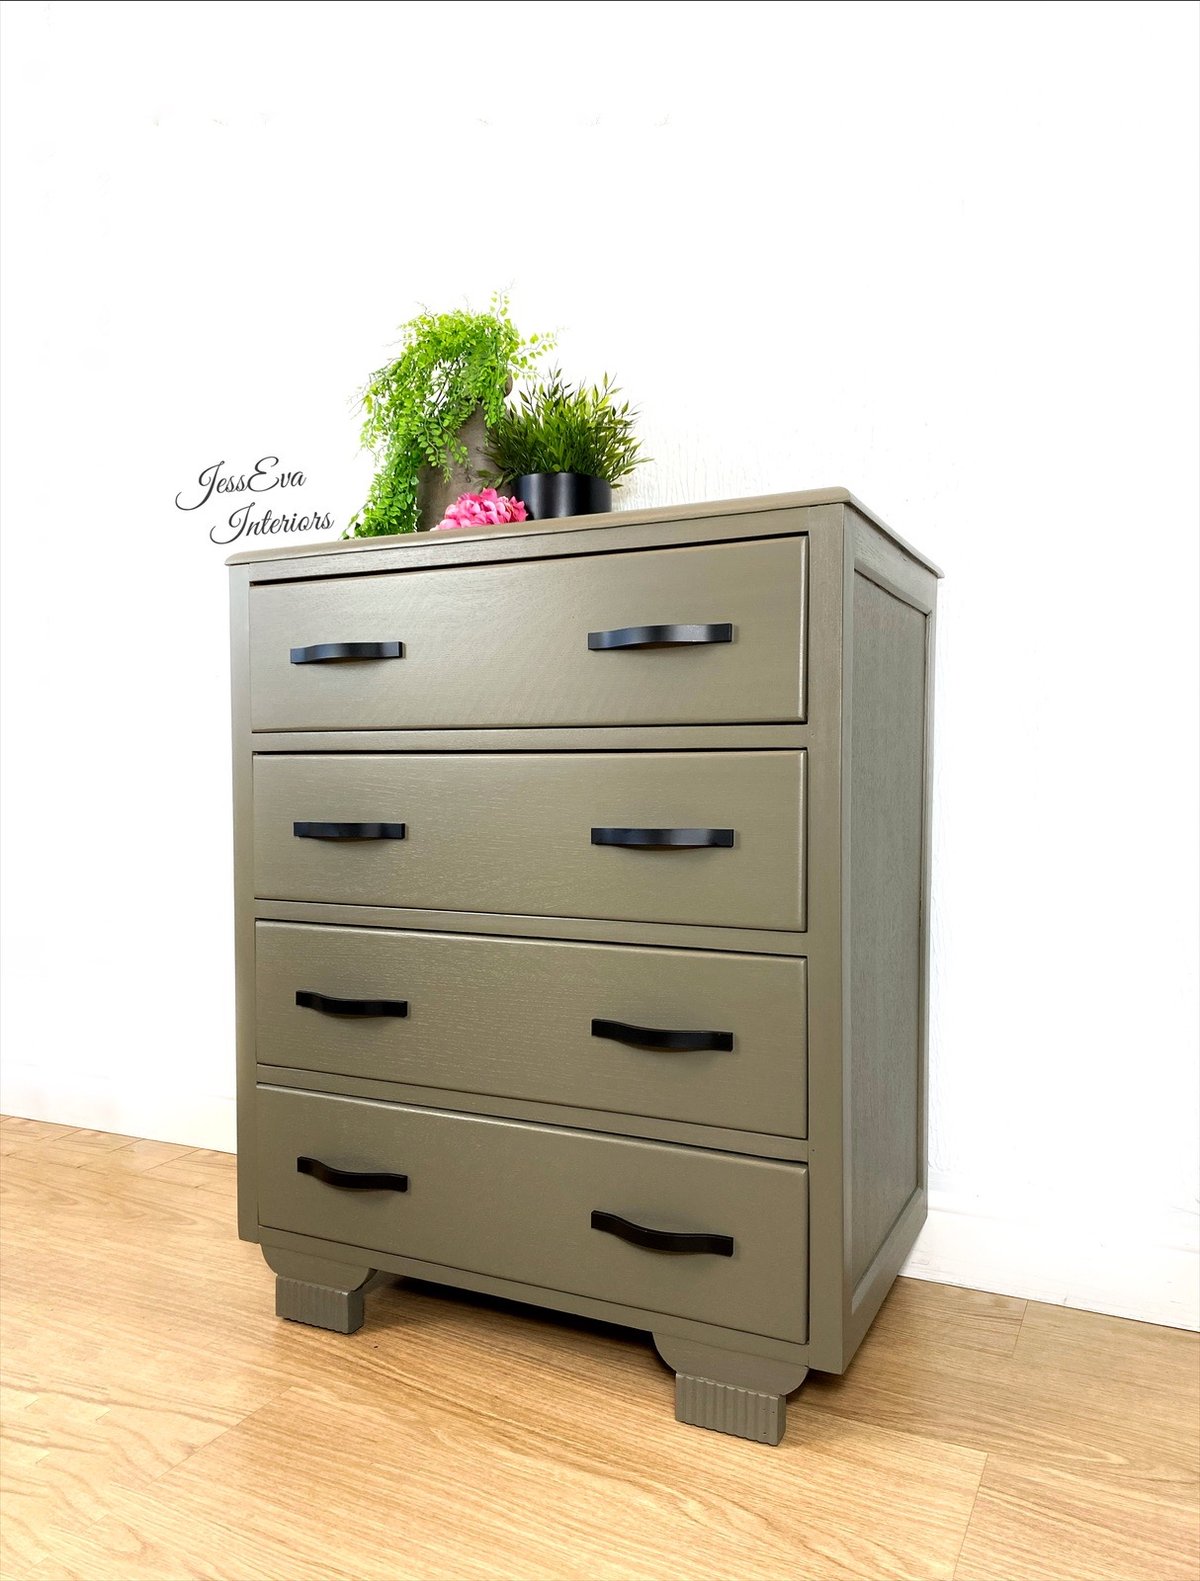 Vintage Chest Of Drawers painted in olive green/grey